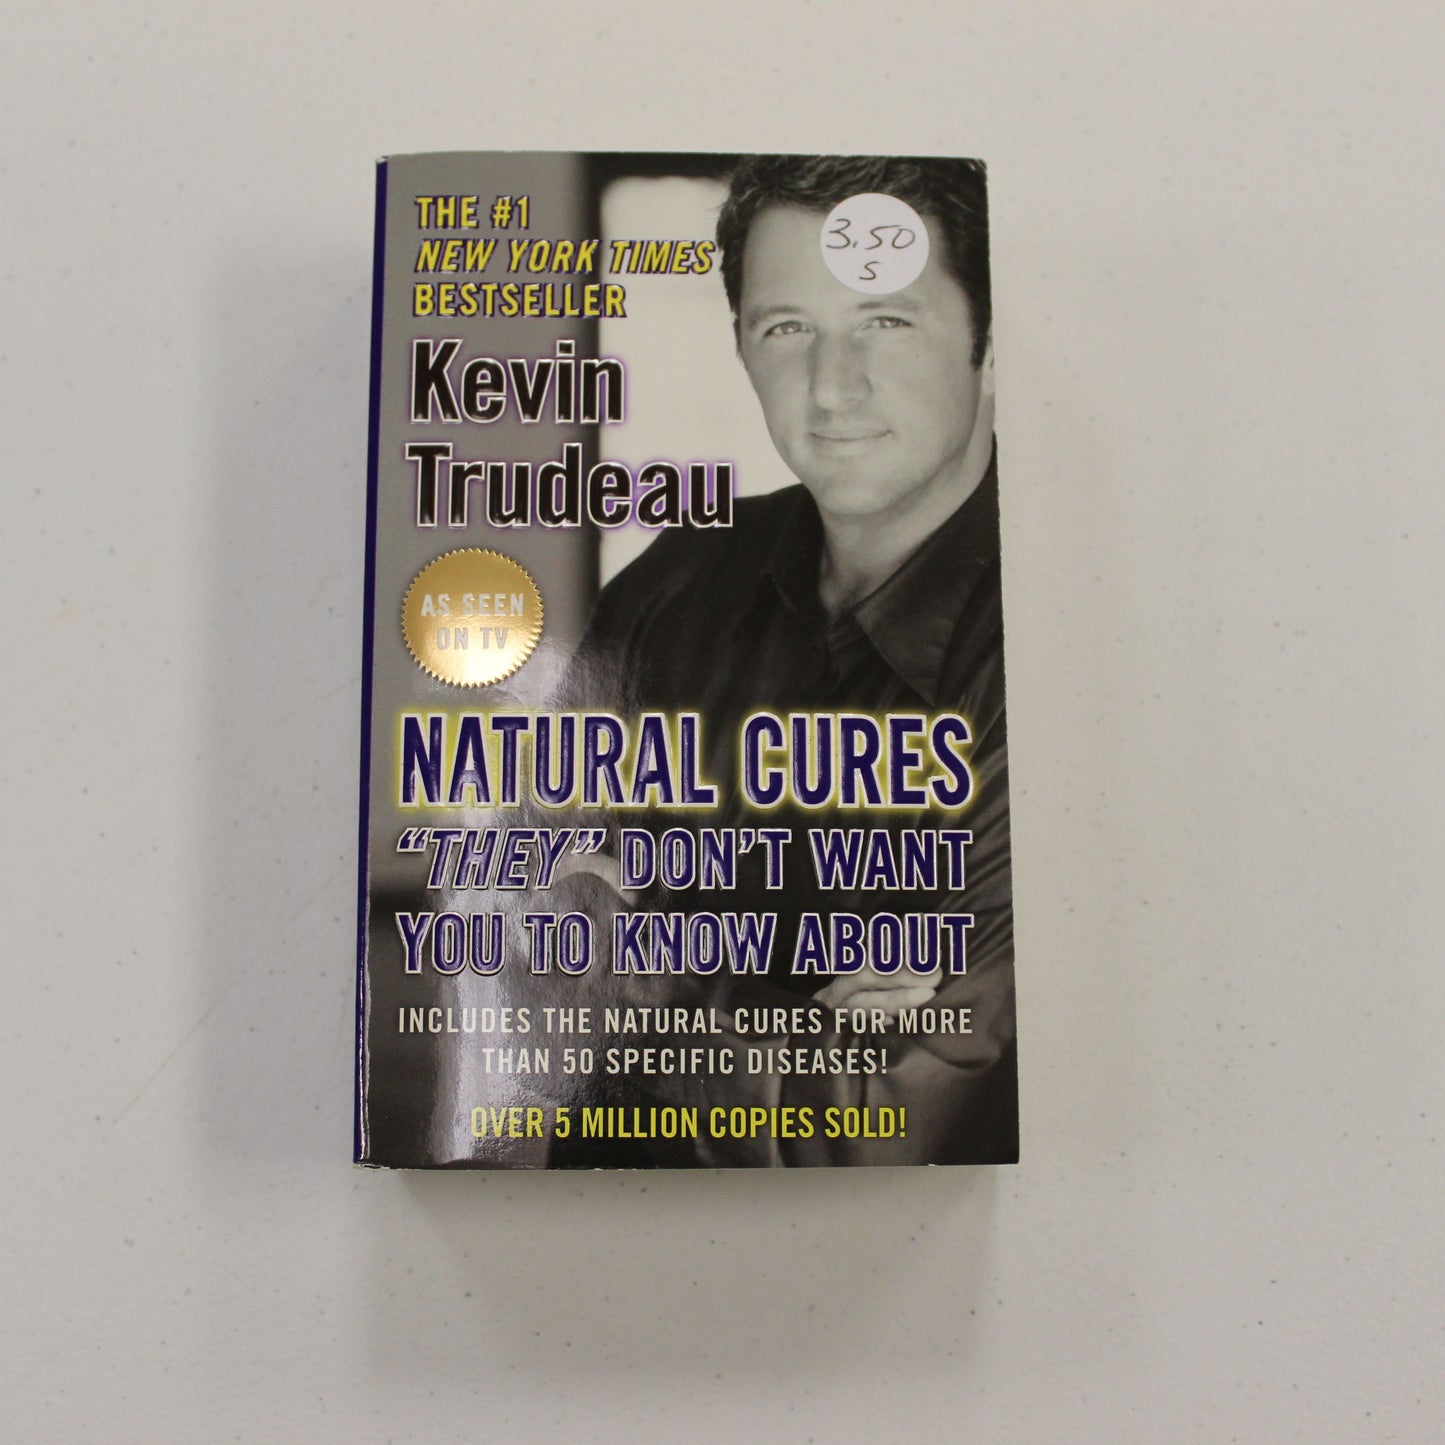 NATURAL CURES "THEY DON'T WANT YOU TO KNOW ABOUT"